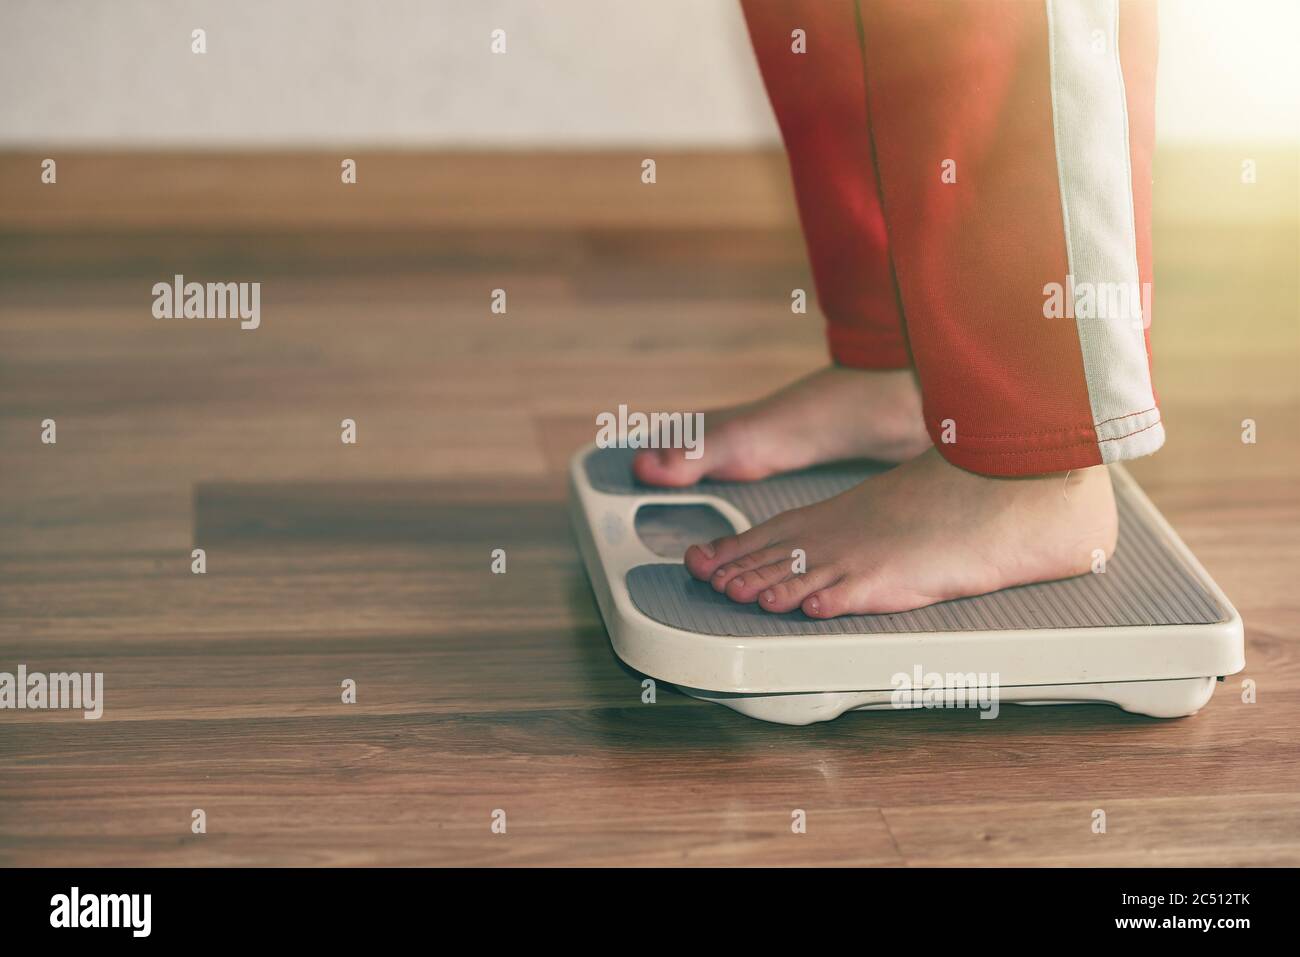 obesity in humans, weight measurement Stock Photo